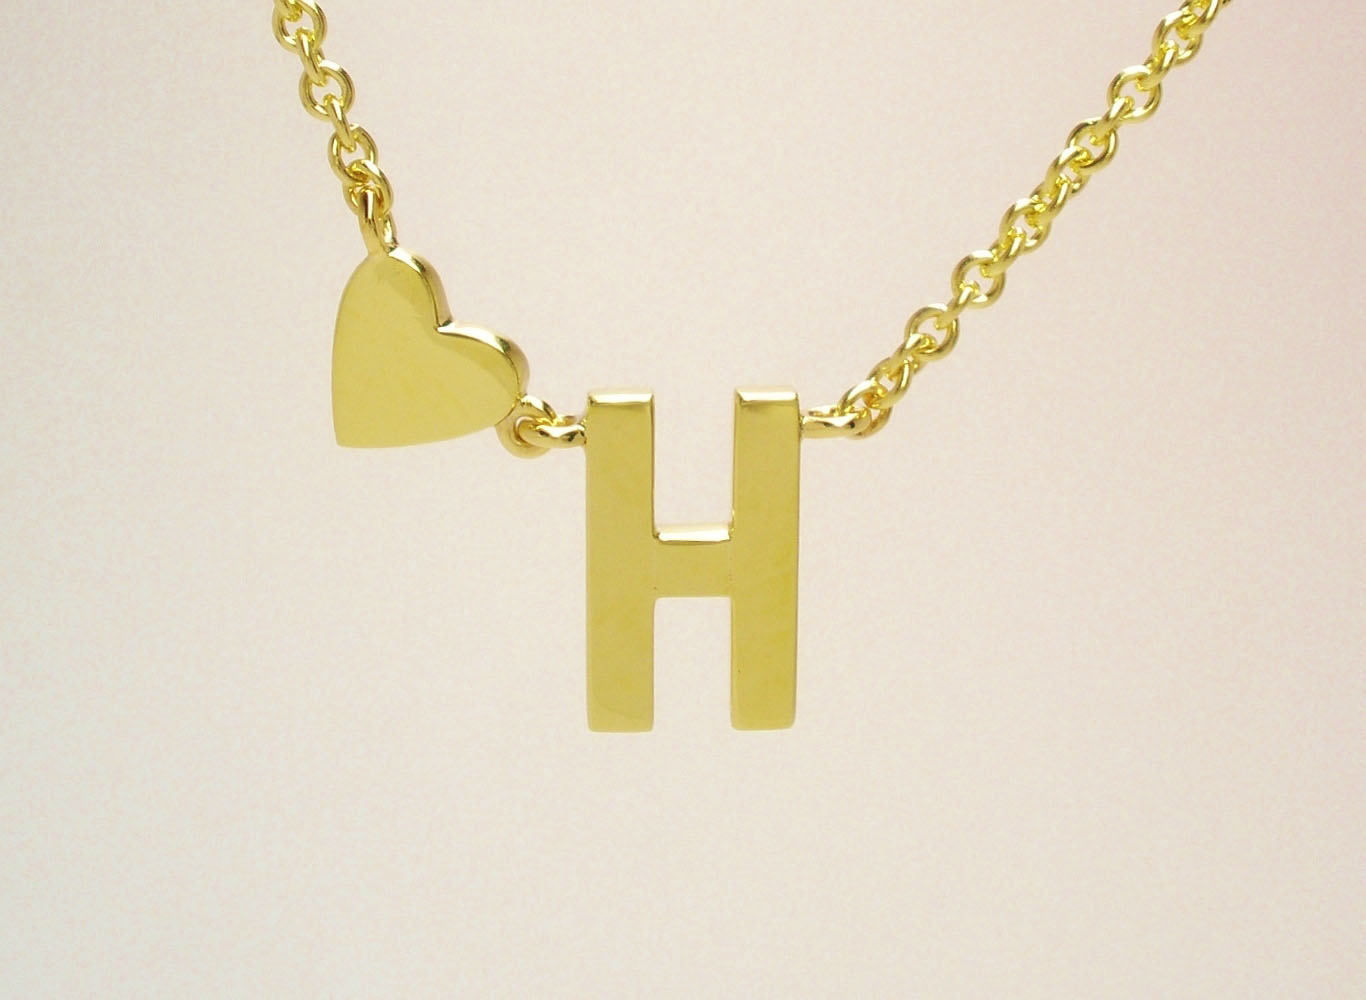 9ct. yellow gold initial 'H' and heart pendant created from a deceased family members wedding ring